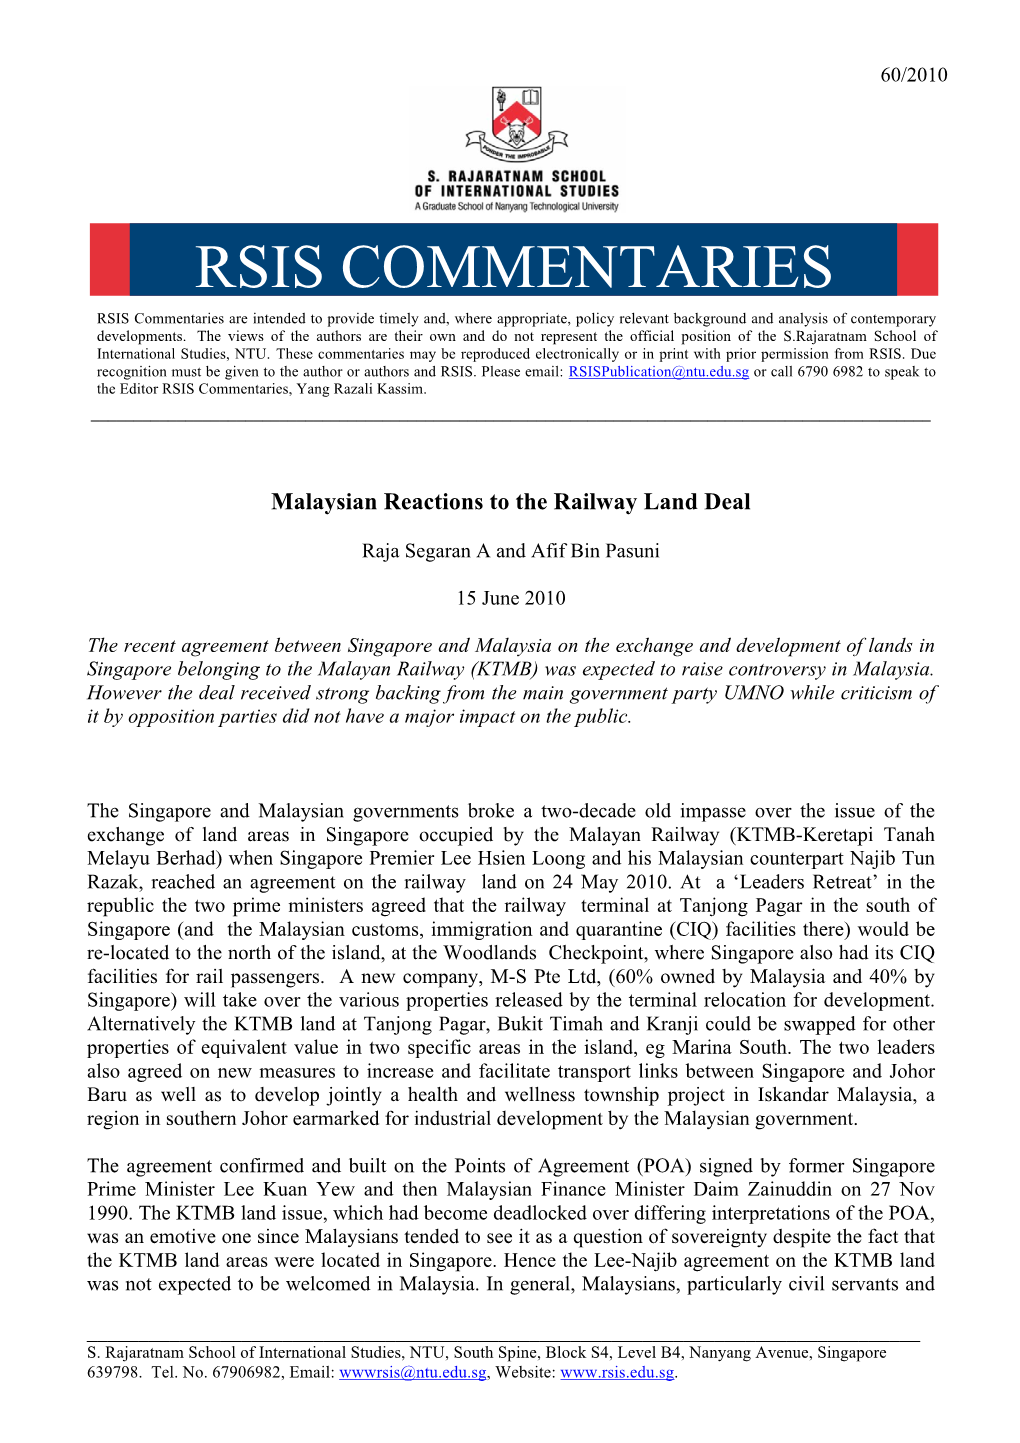 RSIS COMMENTARIES RSIS Commentaries Are Intended to Provide Timely And, Where Appropriate, Policy Relevant Background and Analysis of Contemporary Developments